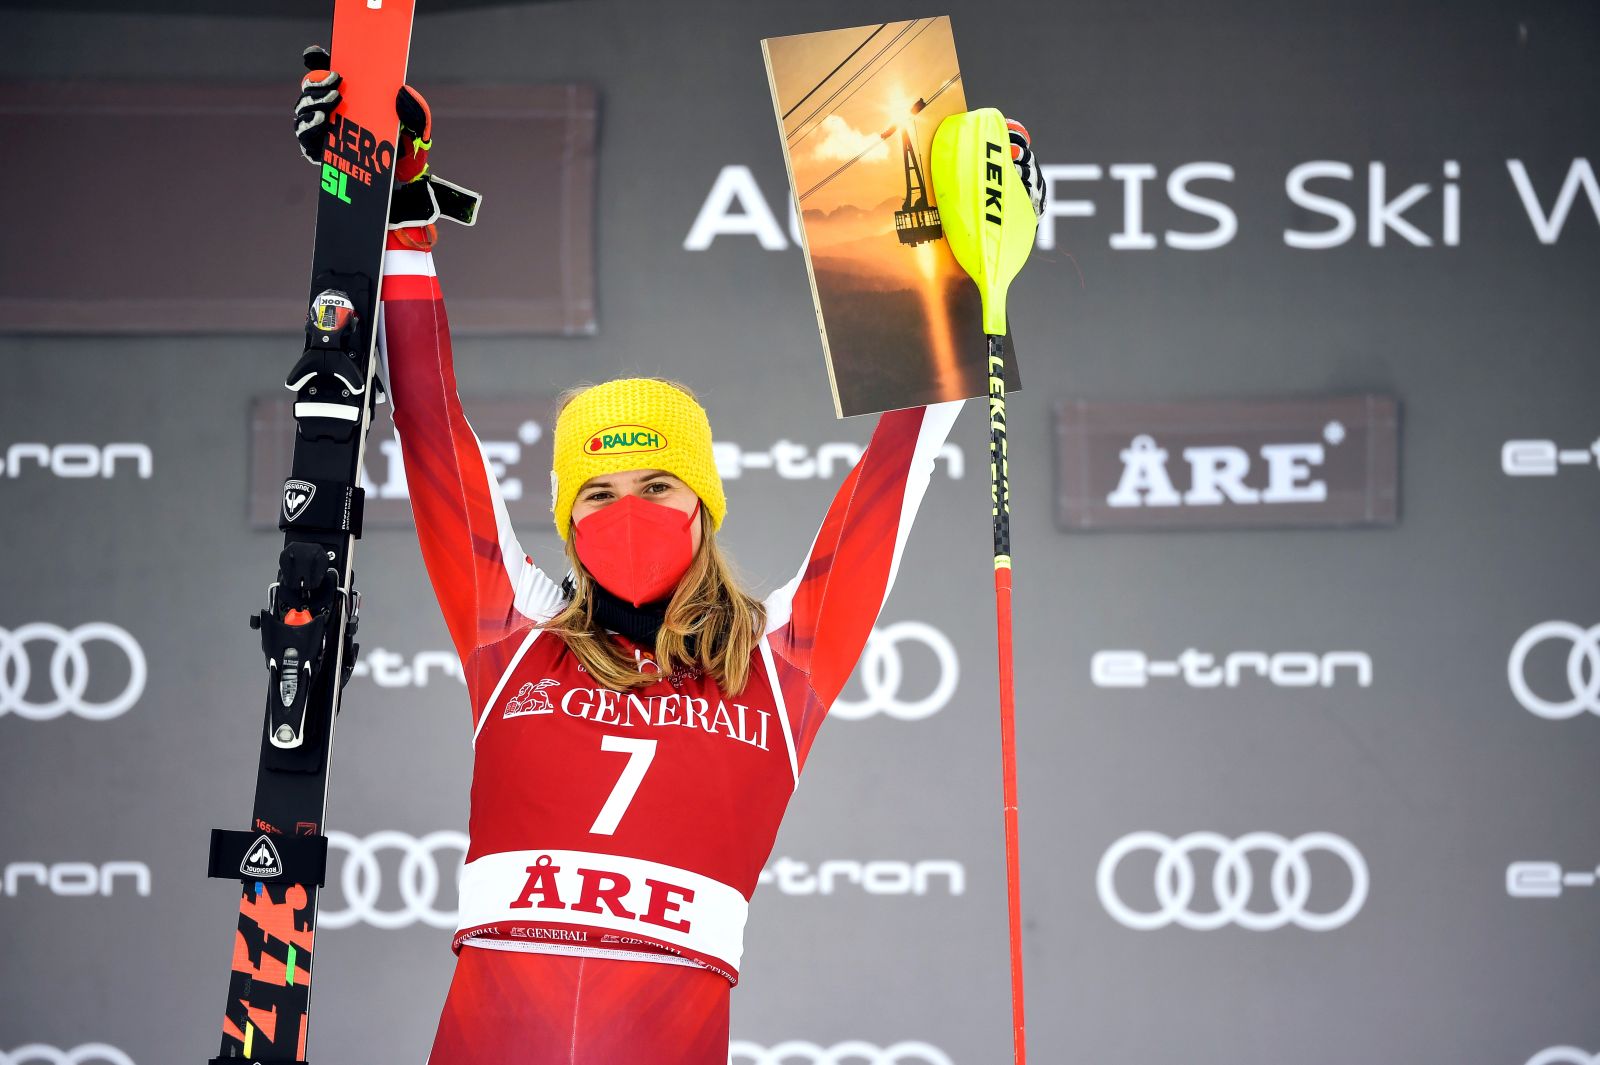 epa09071720 Katharina Liensberger of Austria celebrates on the podium after winning the women's Slalom race of the FIS Alpine Skiing World Cup in Are, Sweden, 13 March 2021.  EPA/Pontus Lundahl  SWEDEN OUT